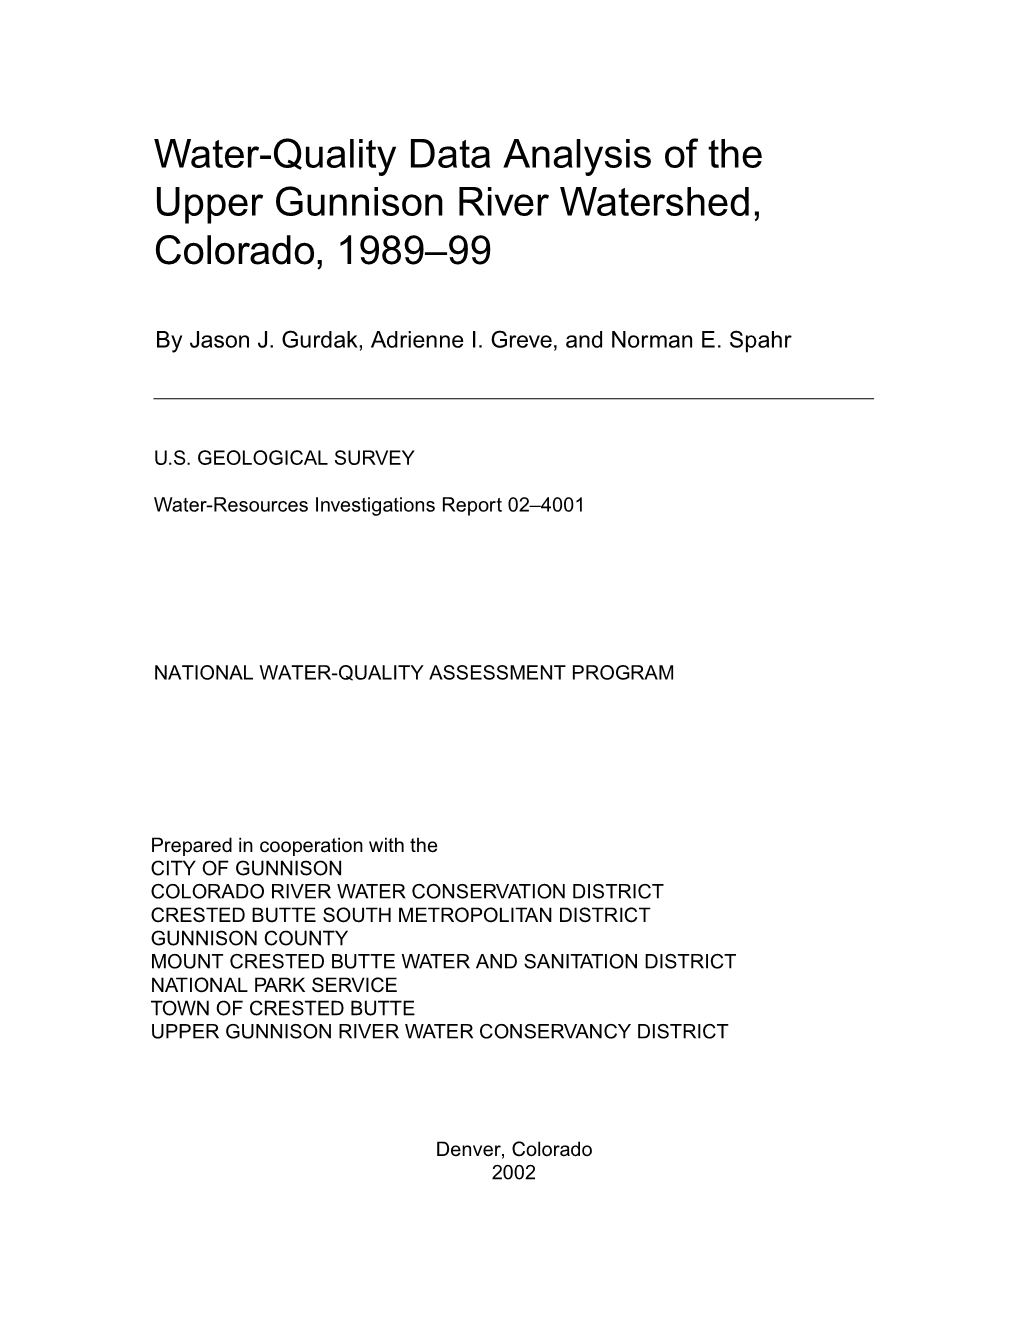 Water-Quality Data Analysis of the Upper Gunnison River Watershed, Colorado, 1989–99